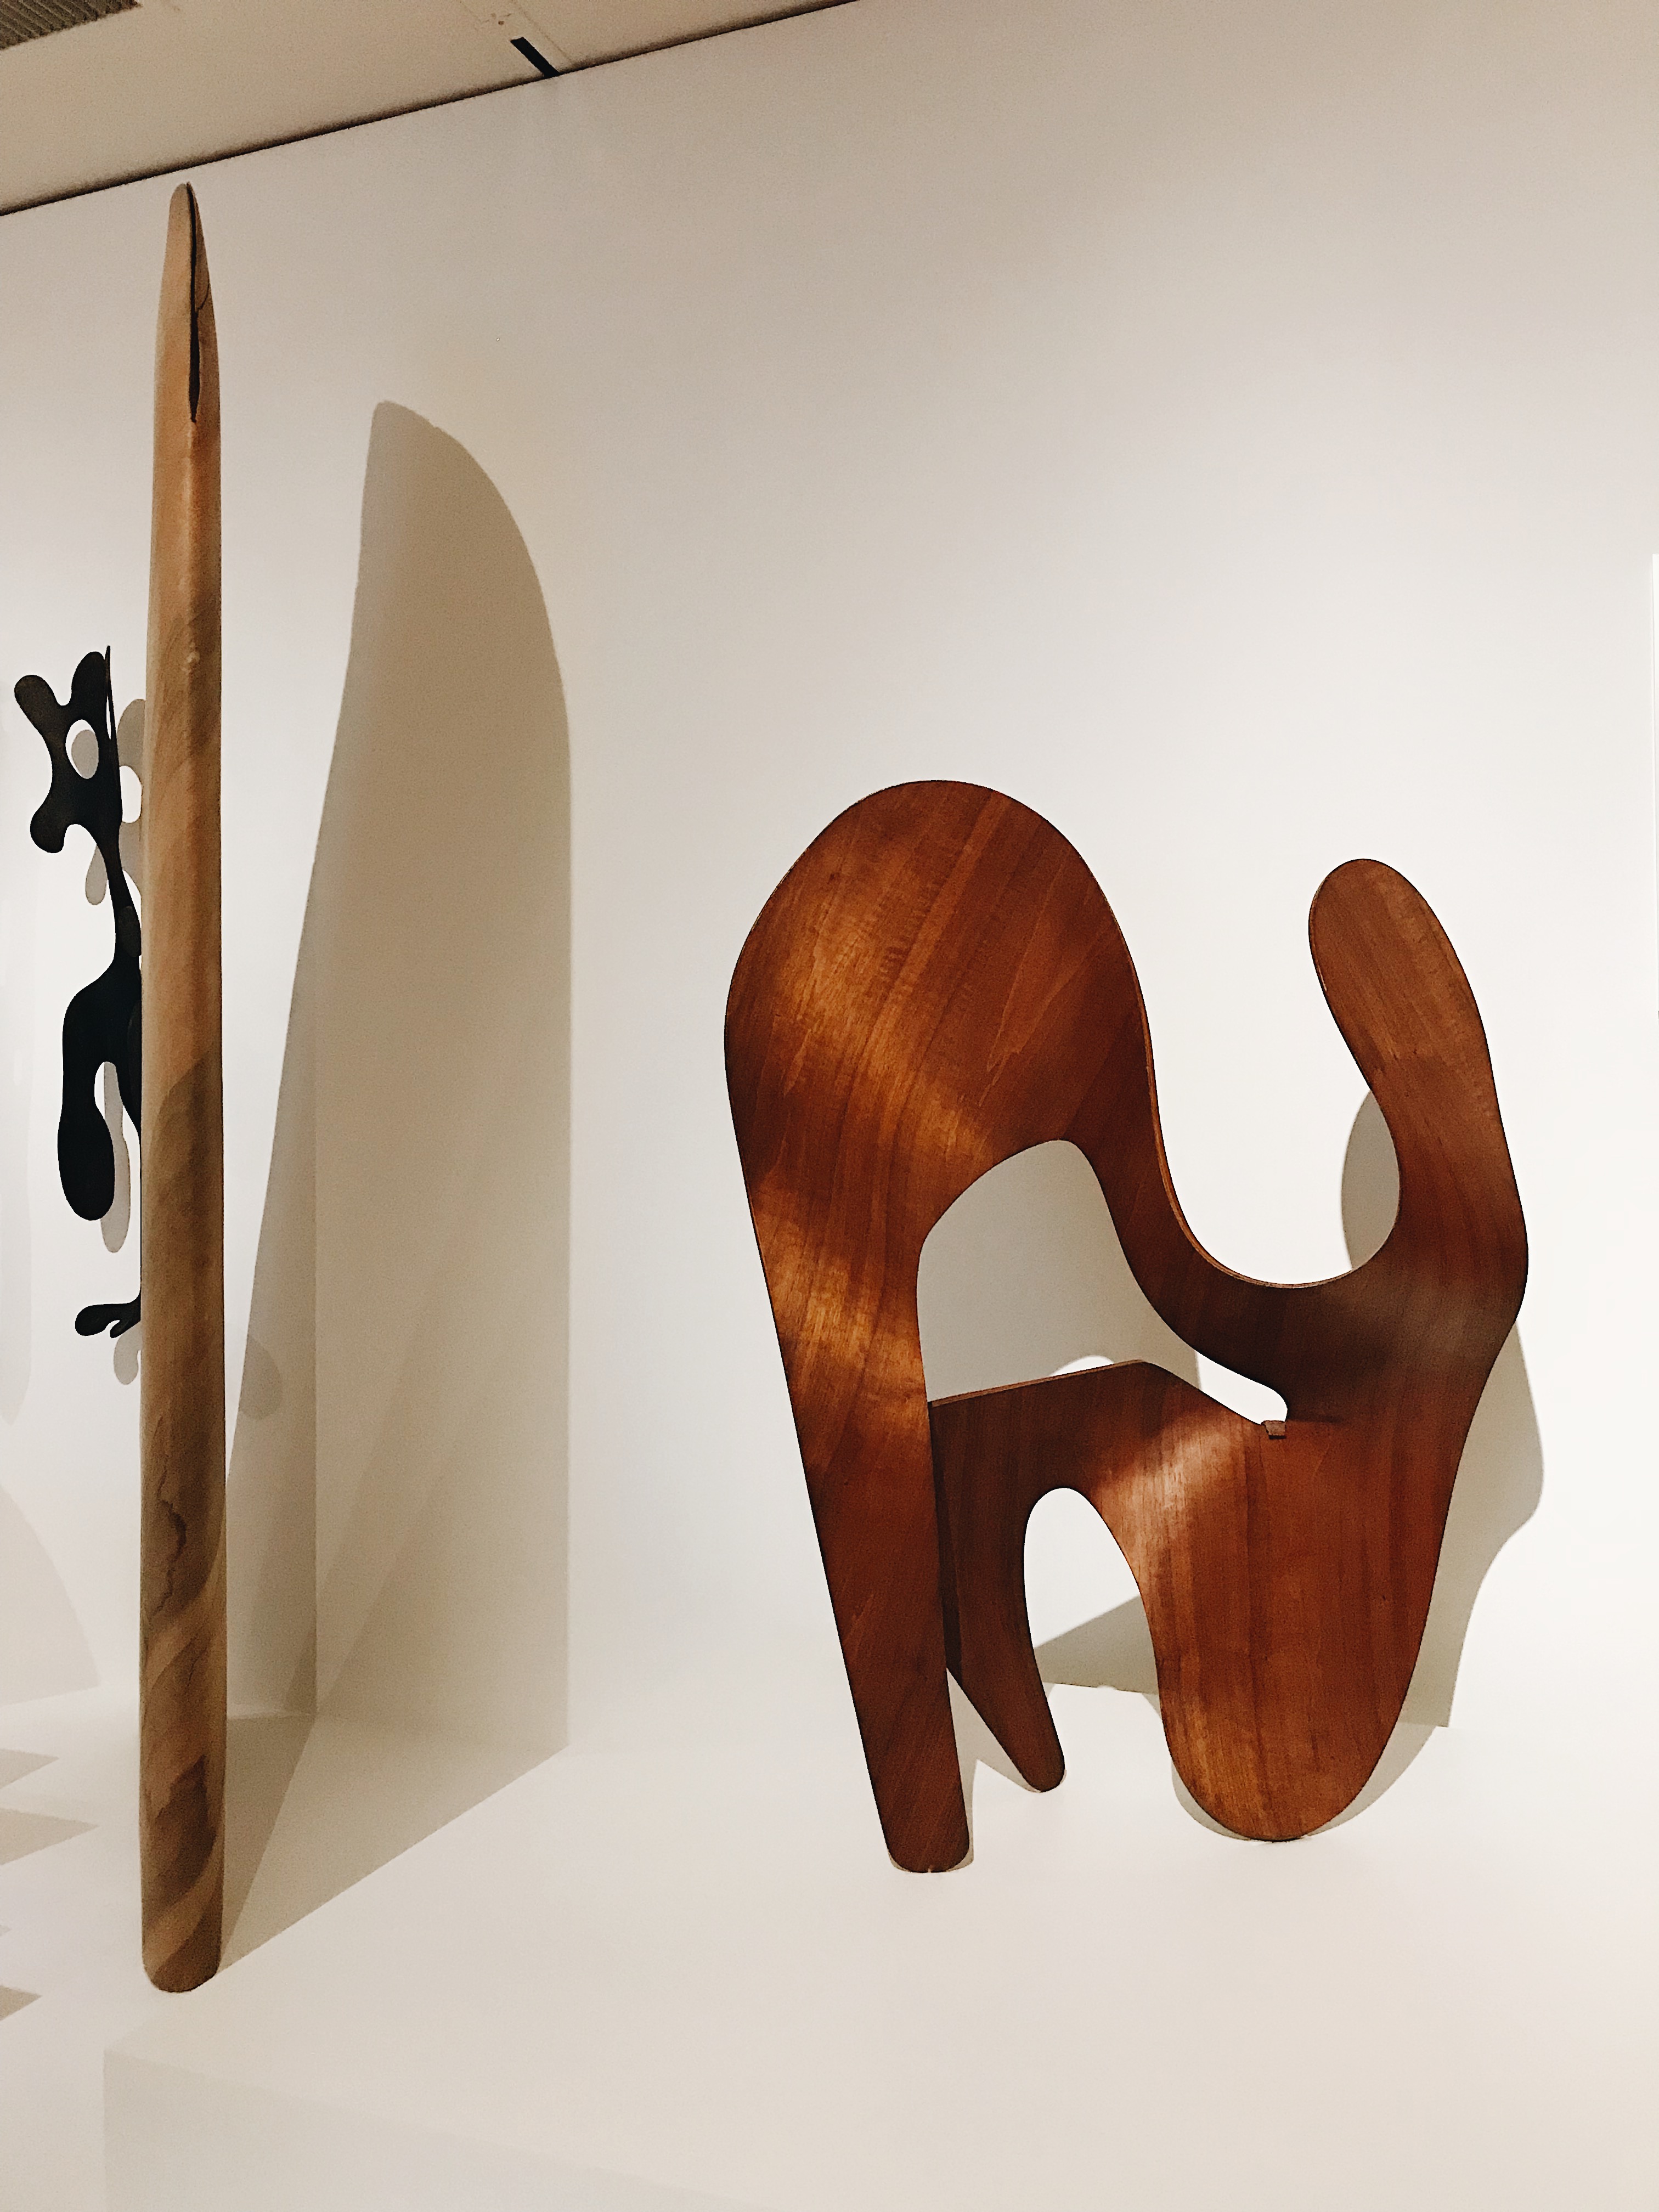 Untitled molded plywood. Between 1941 and 1943, the Eames began a series of sculptural experiments, pushing the boundaries of the compound. (Jen Woo)